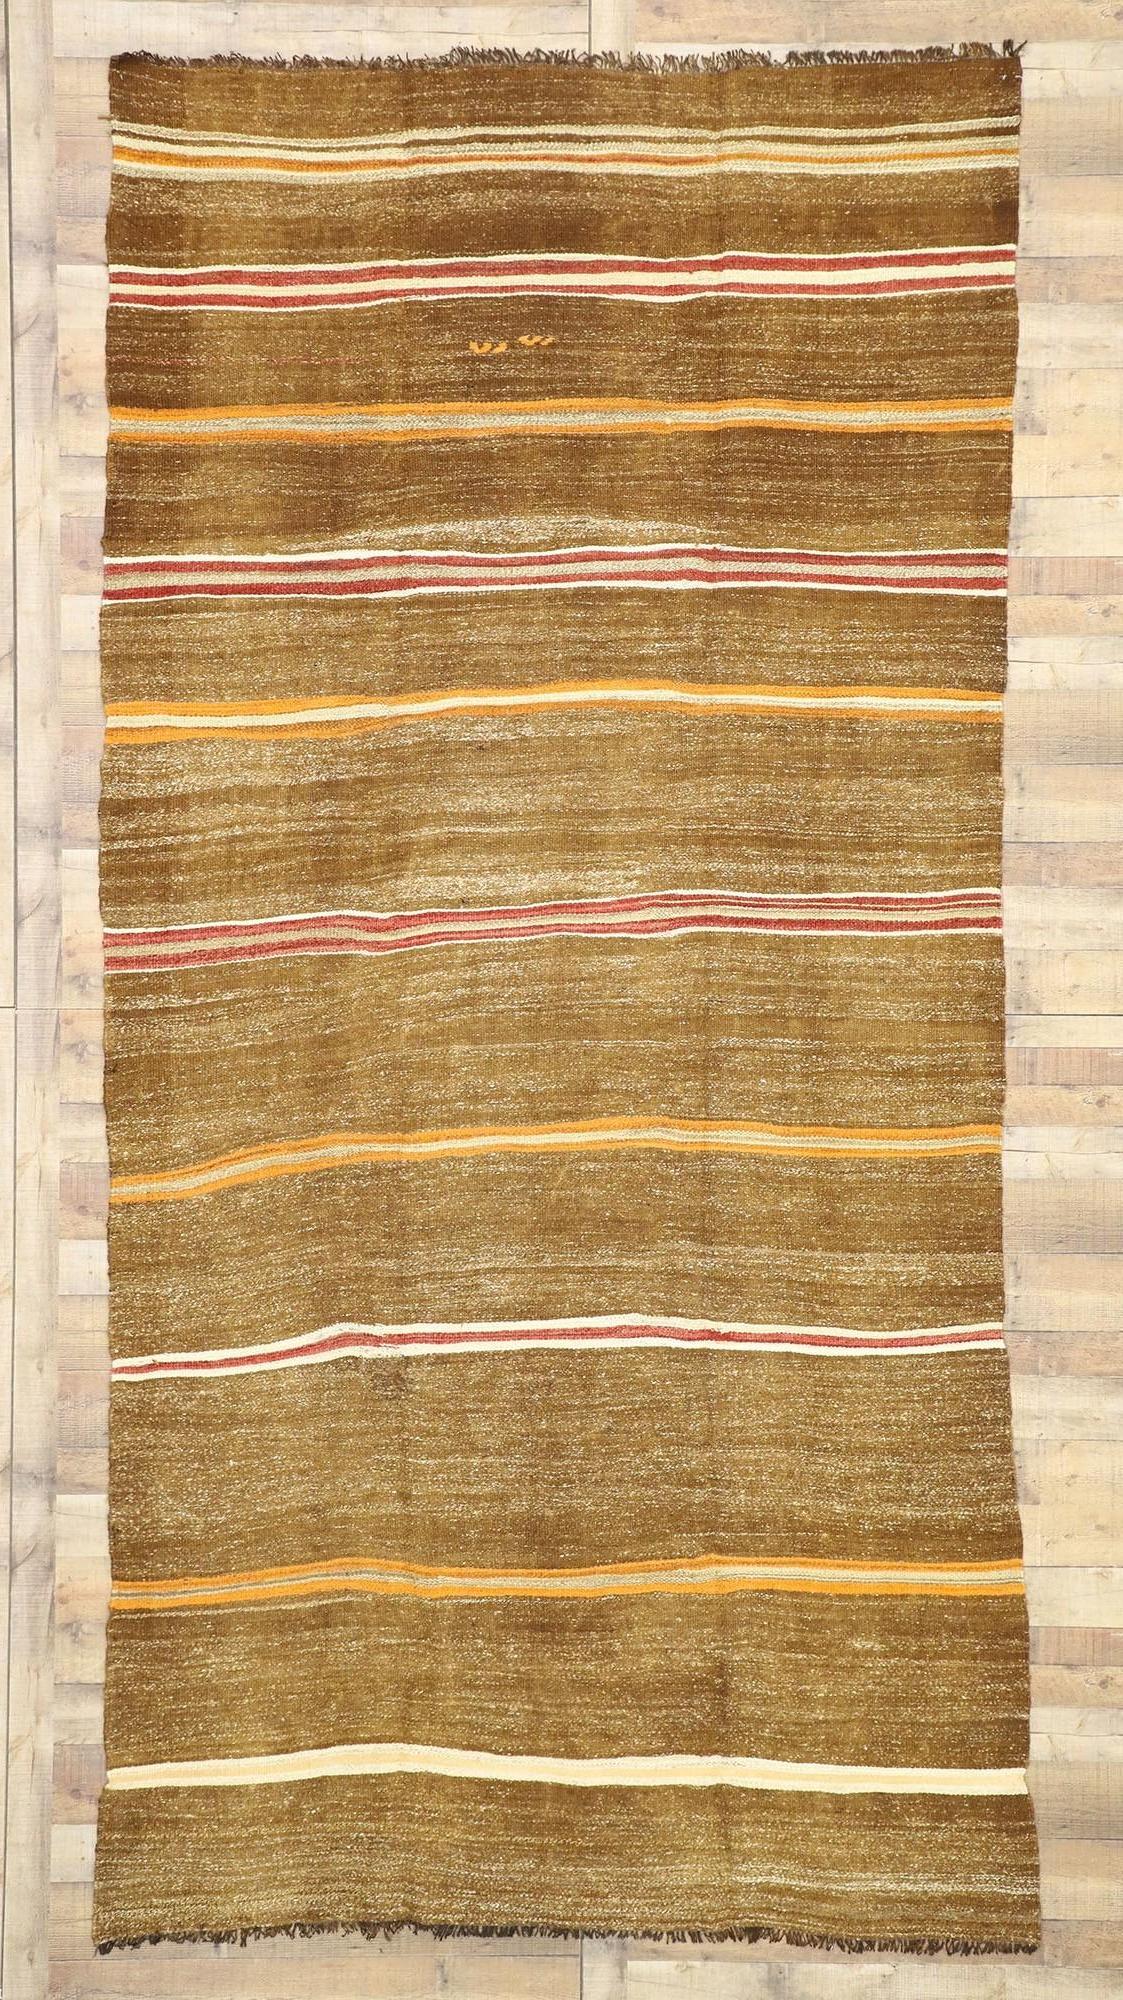 Hand-Woven Vintage Turkish Striped Kilim Rug with Tribal Style, Flat-Weave Rug